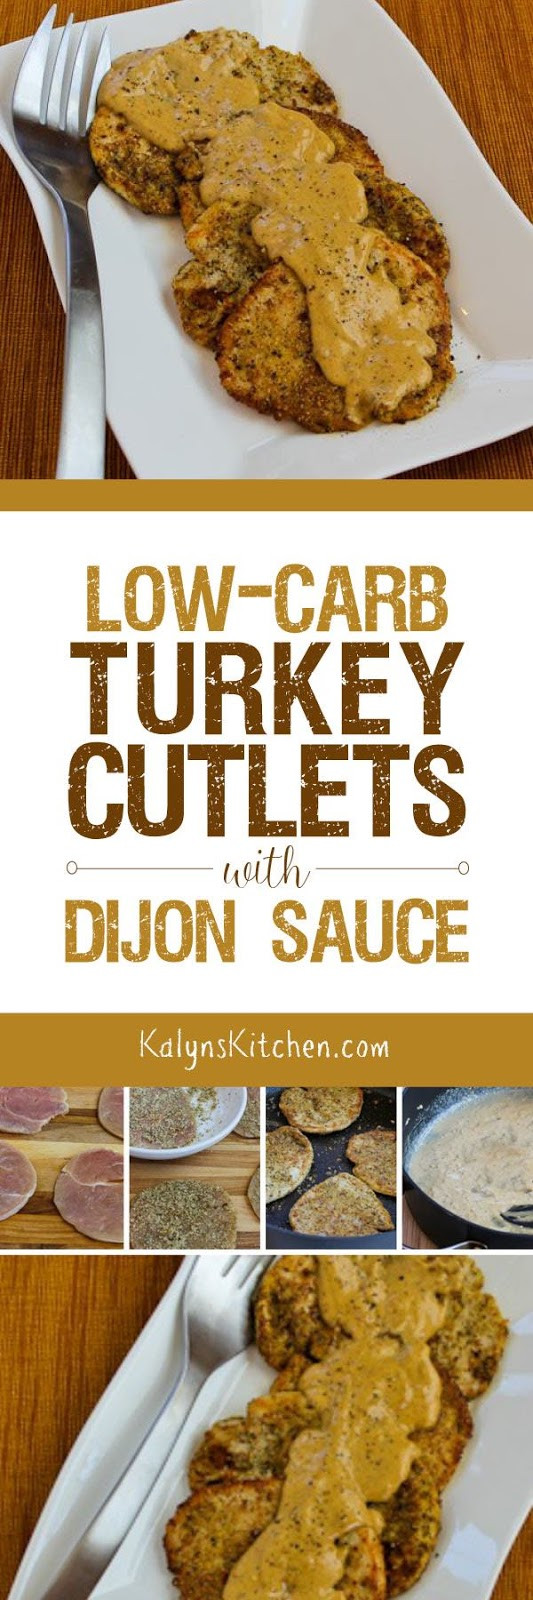 Low Carb Chicken Cutlet Recipes
 Low Carb Turkey Cutlets with Dijon Sauce Kalyn s Kitchen